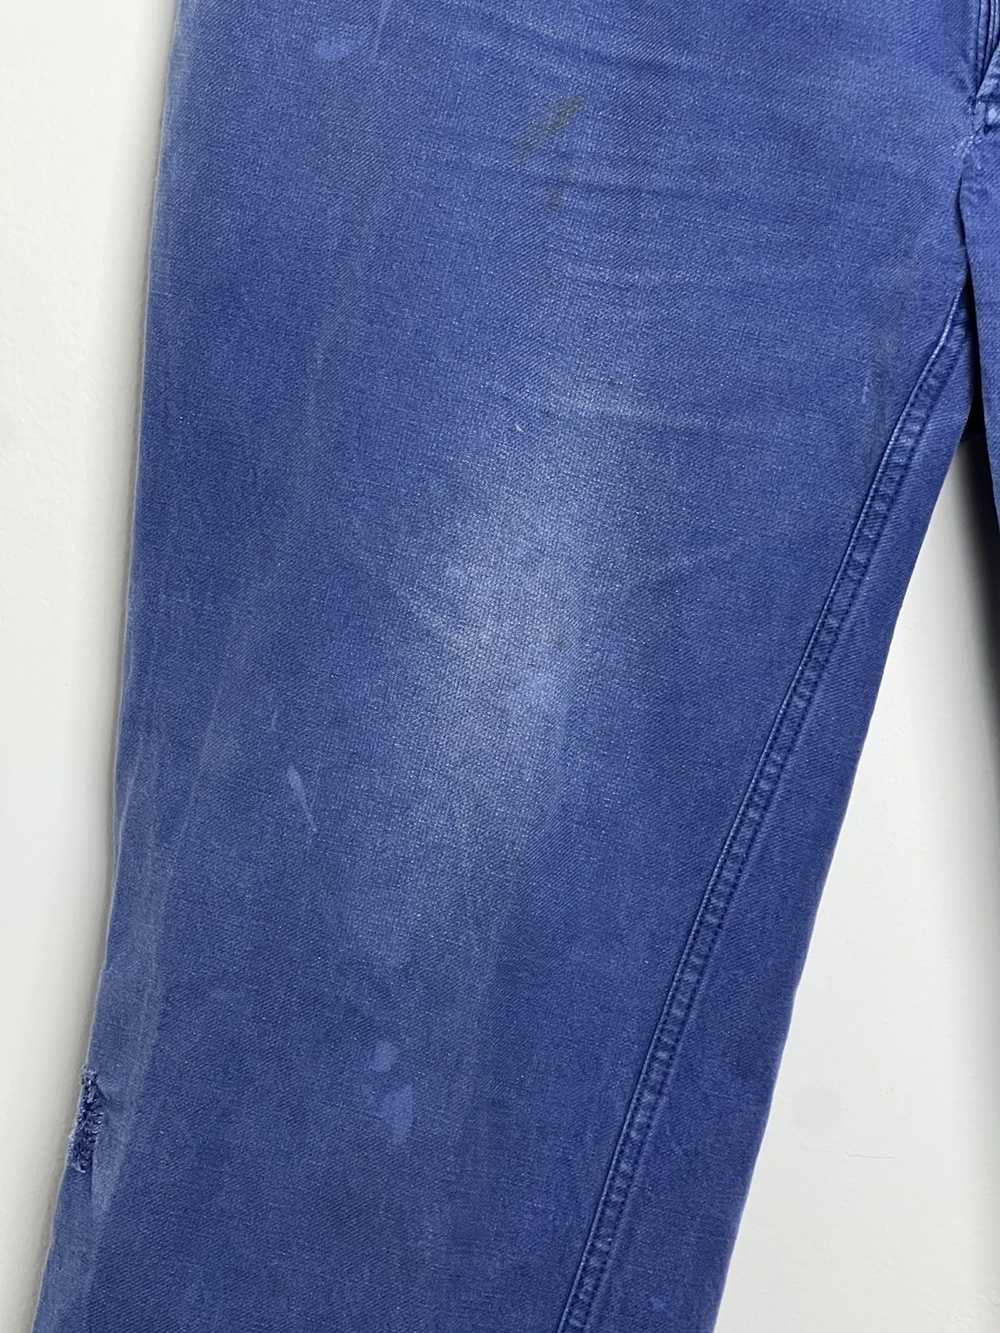 Vintage Distressed French Painter Pants - image 3